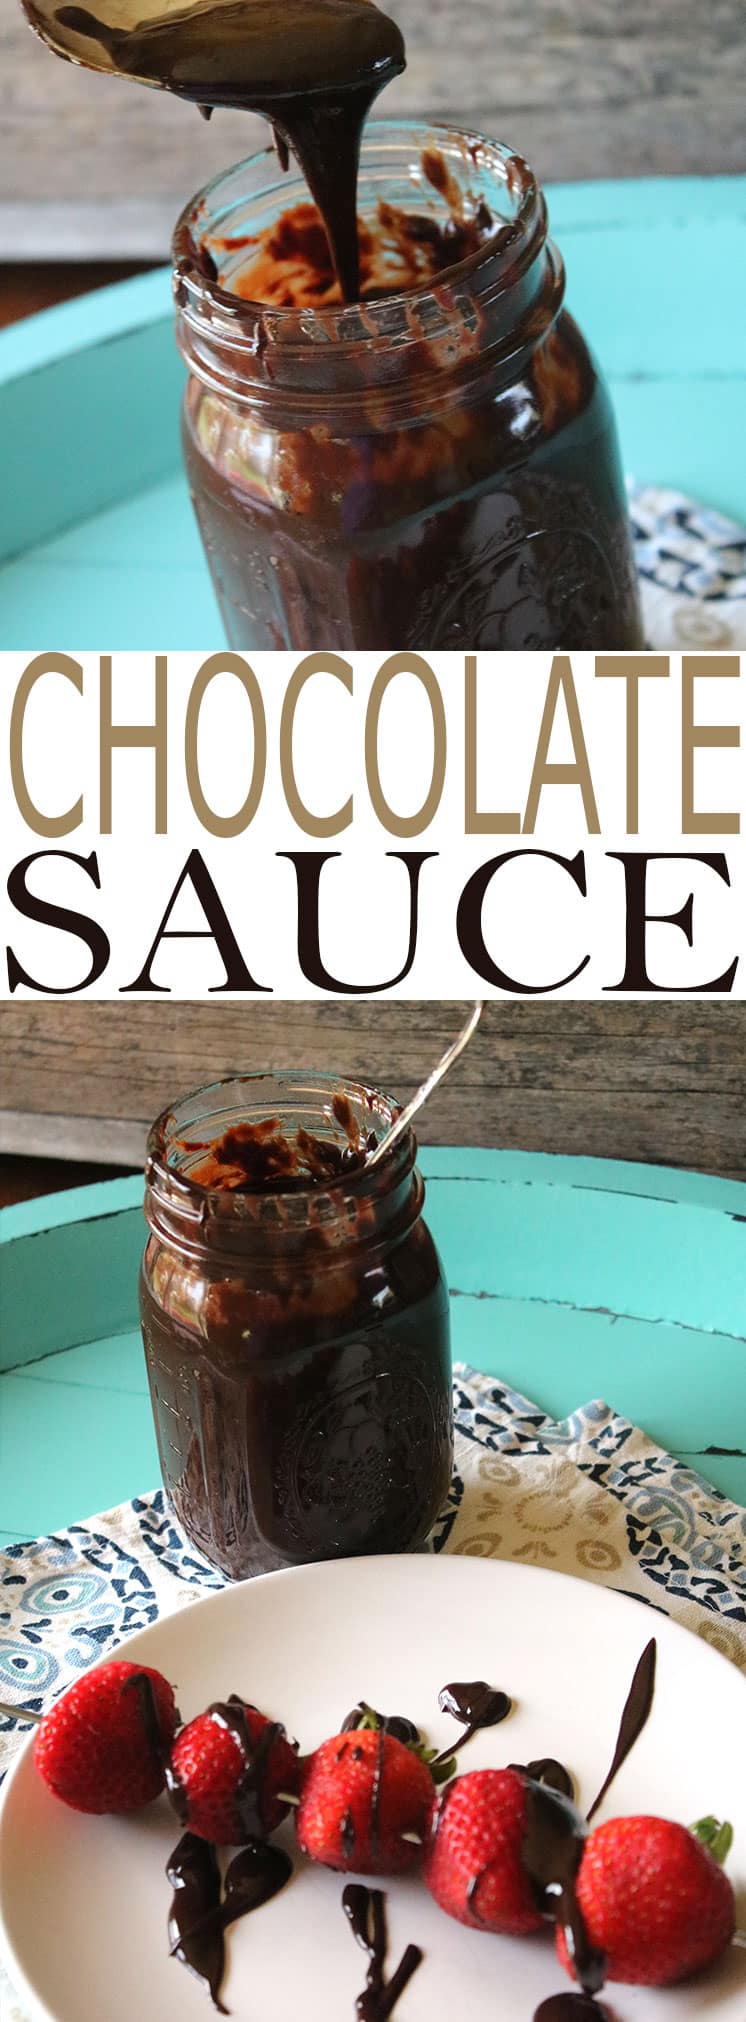 Easy homemade Hot Fudge Sauce recipe that can be used to top desserts, fruit, and more. This is a very versatile chocolate sauce. Serve with fruit and berries.